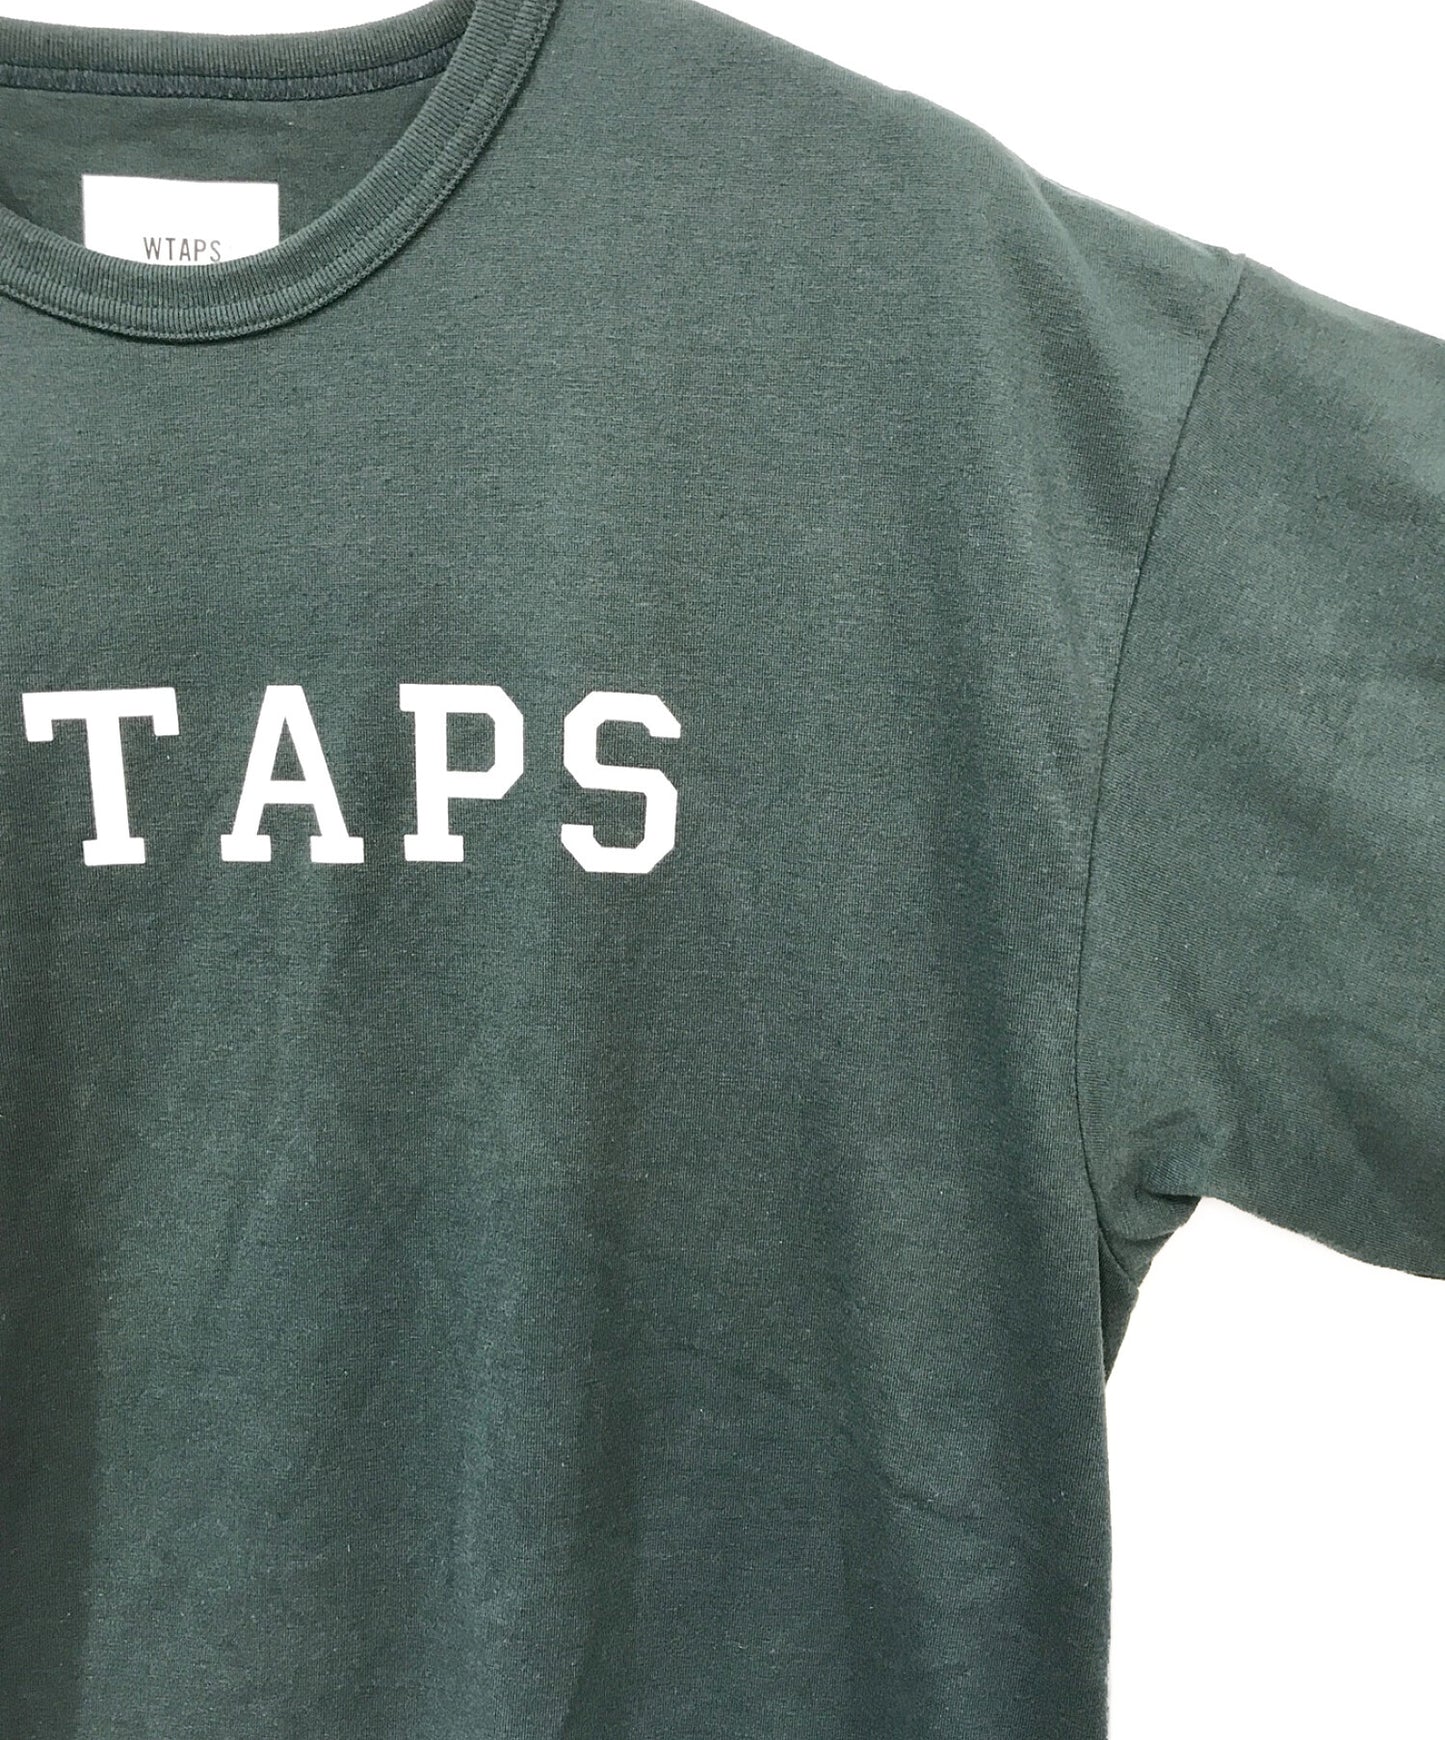 [Pre-owned] WTAPS Logo print T-shirts 221ATDT-CSM17